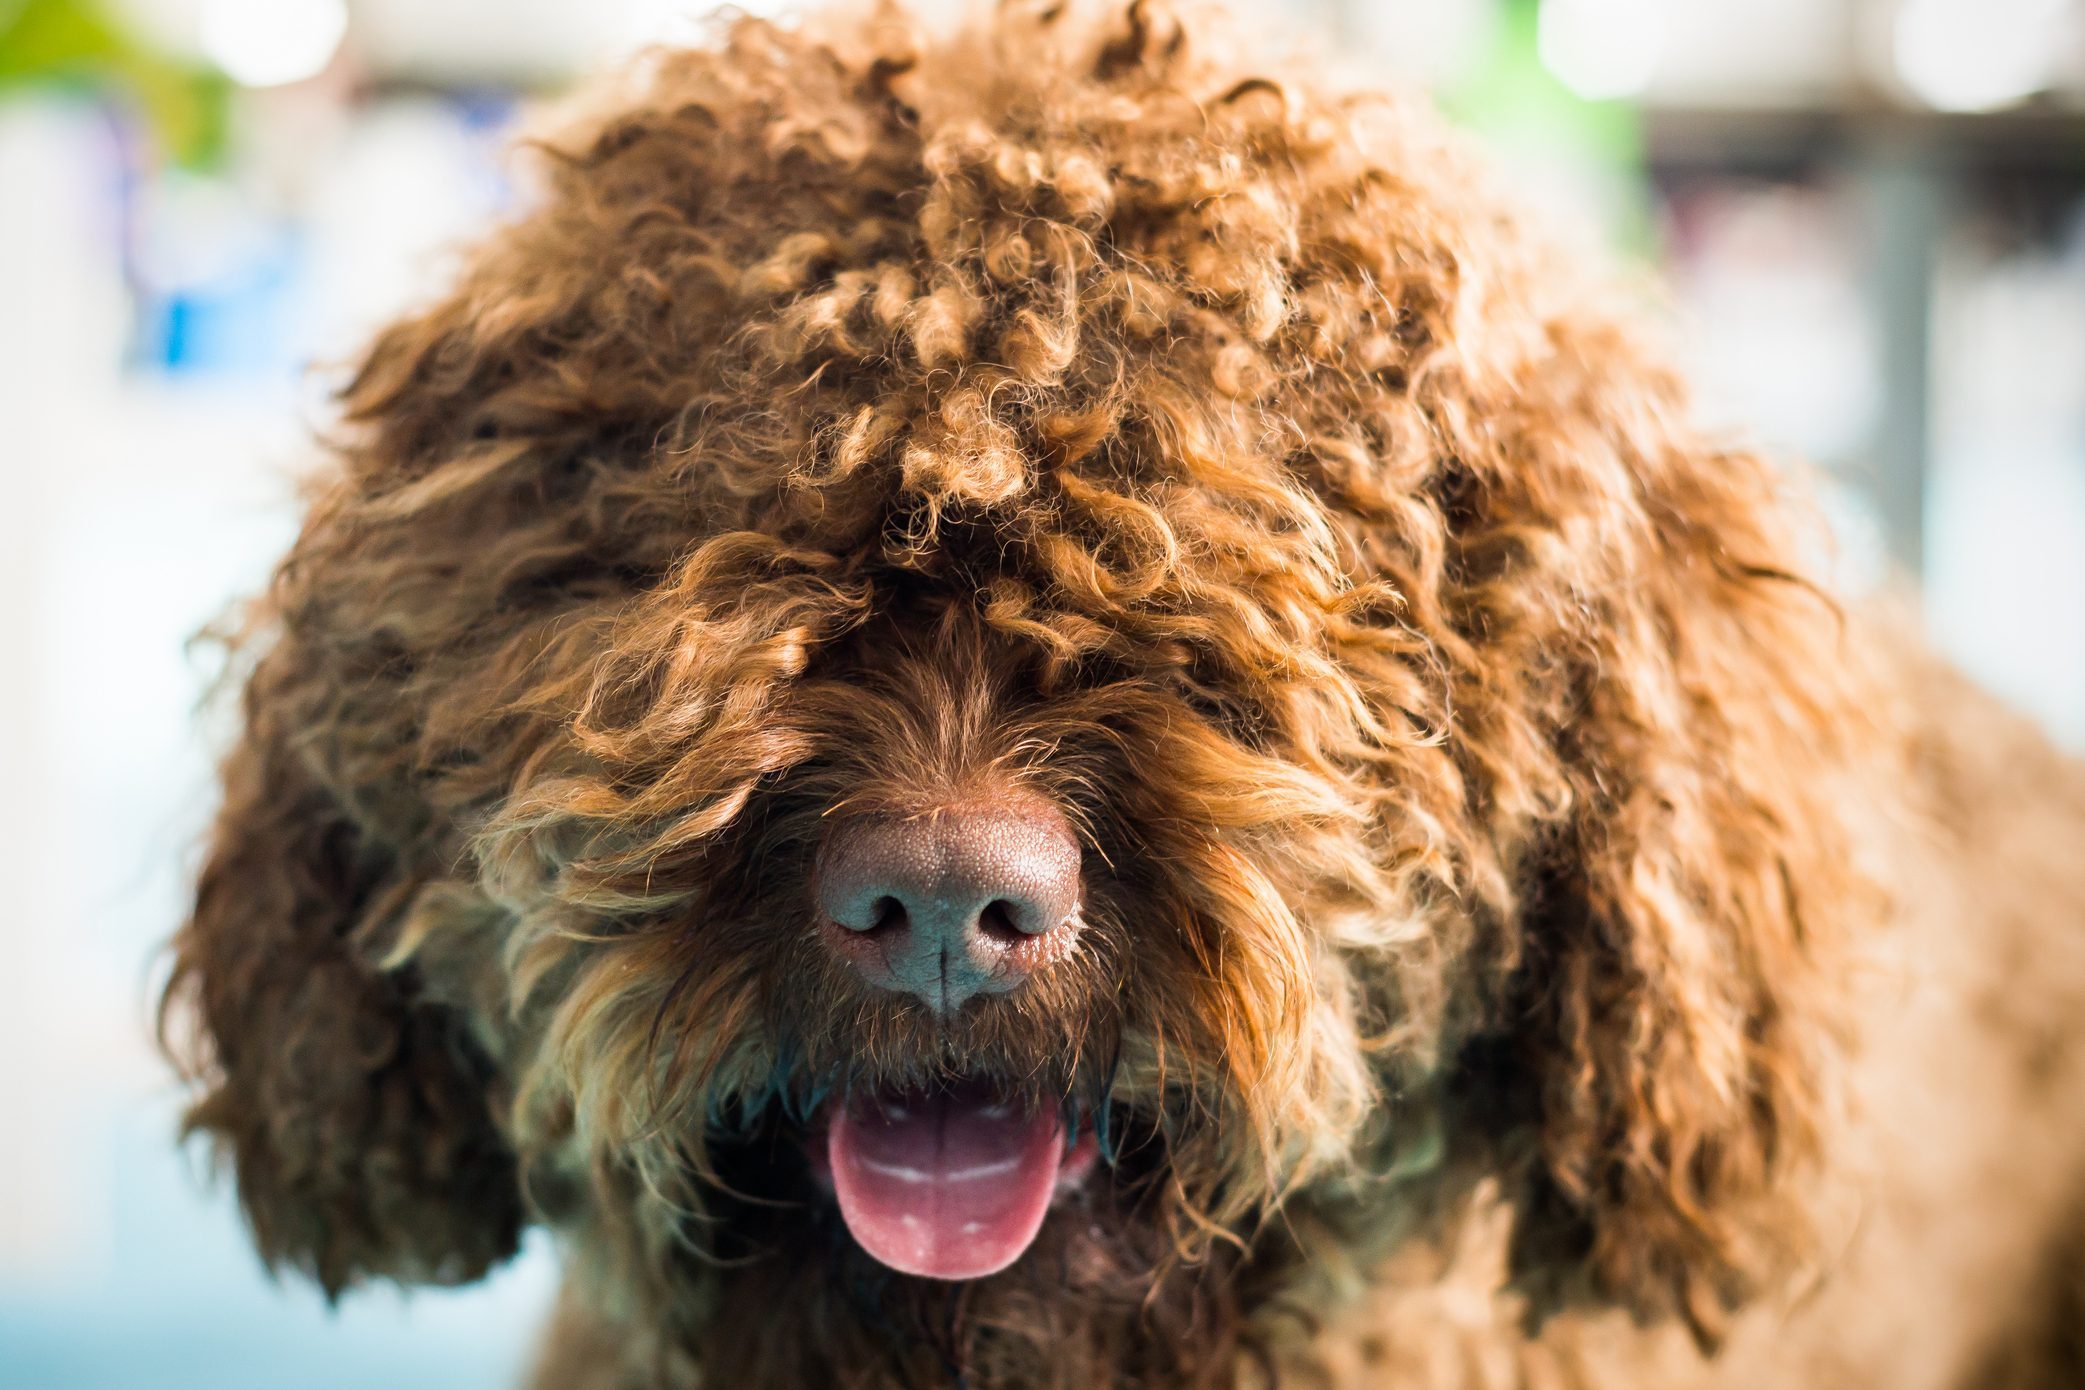 15 Curly Haired Dogs with Pictures | Reader's Digest